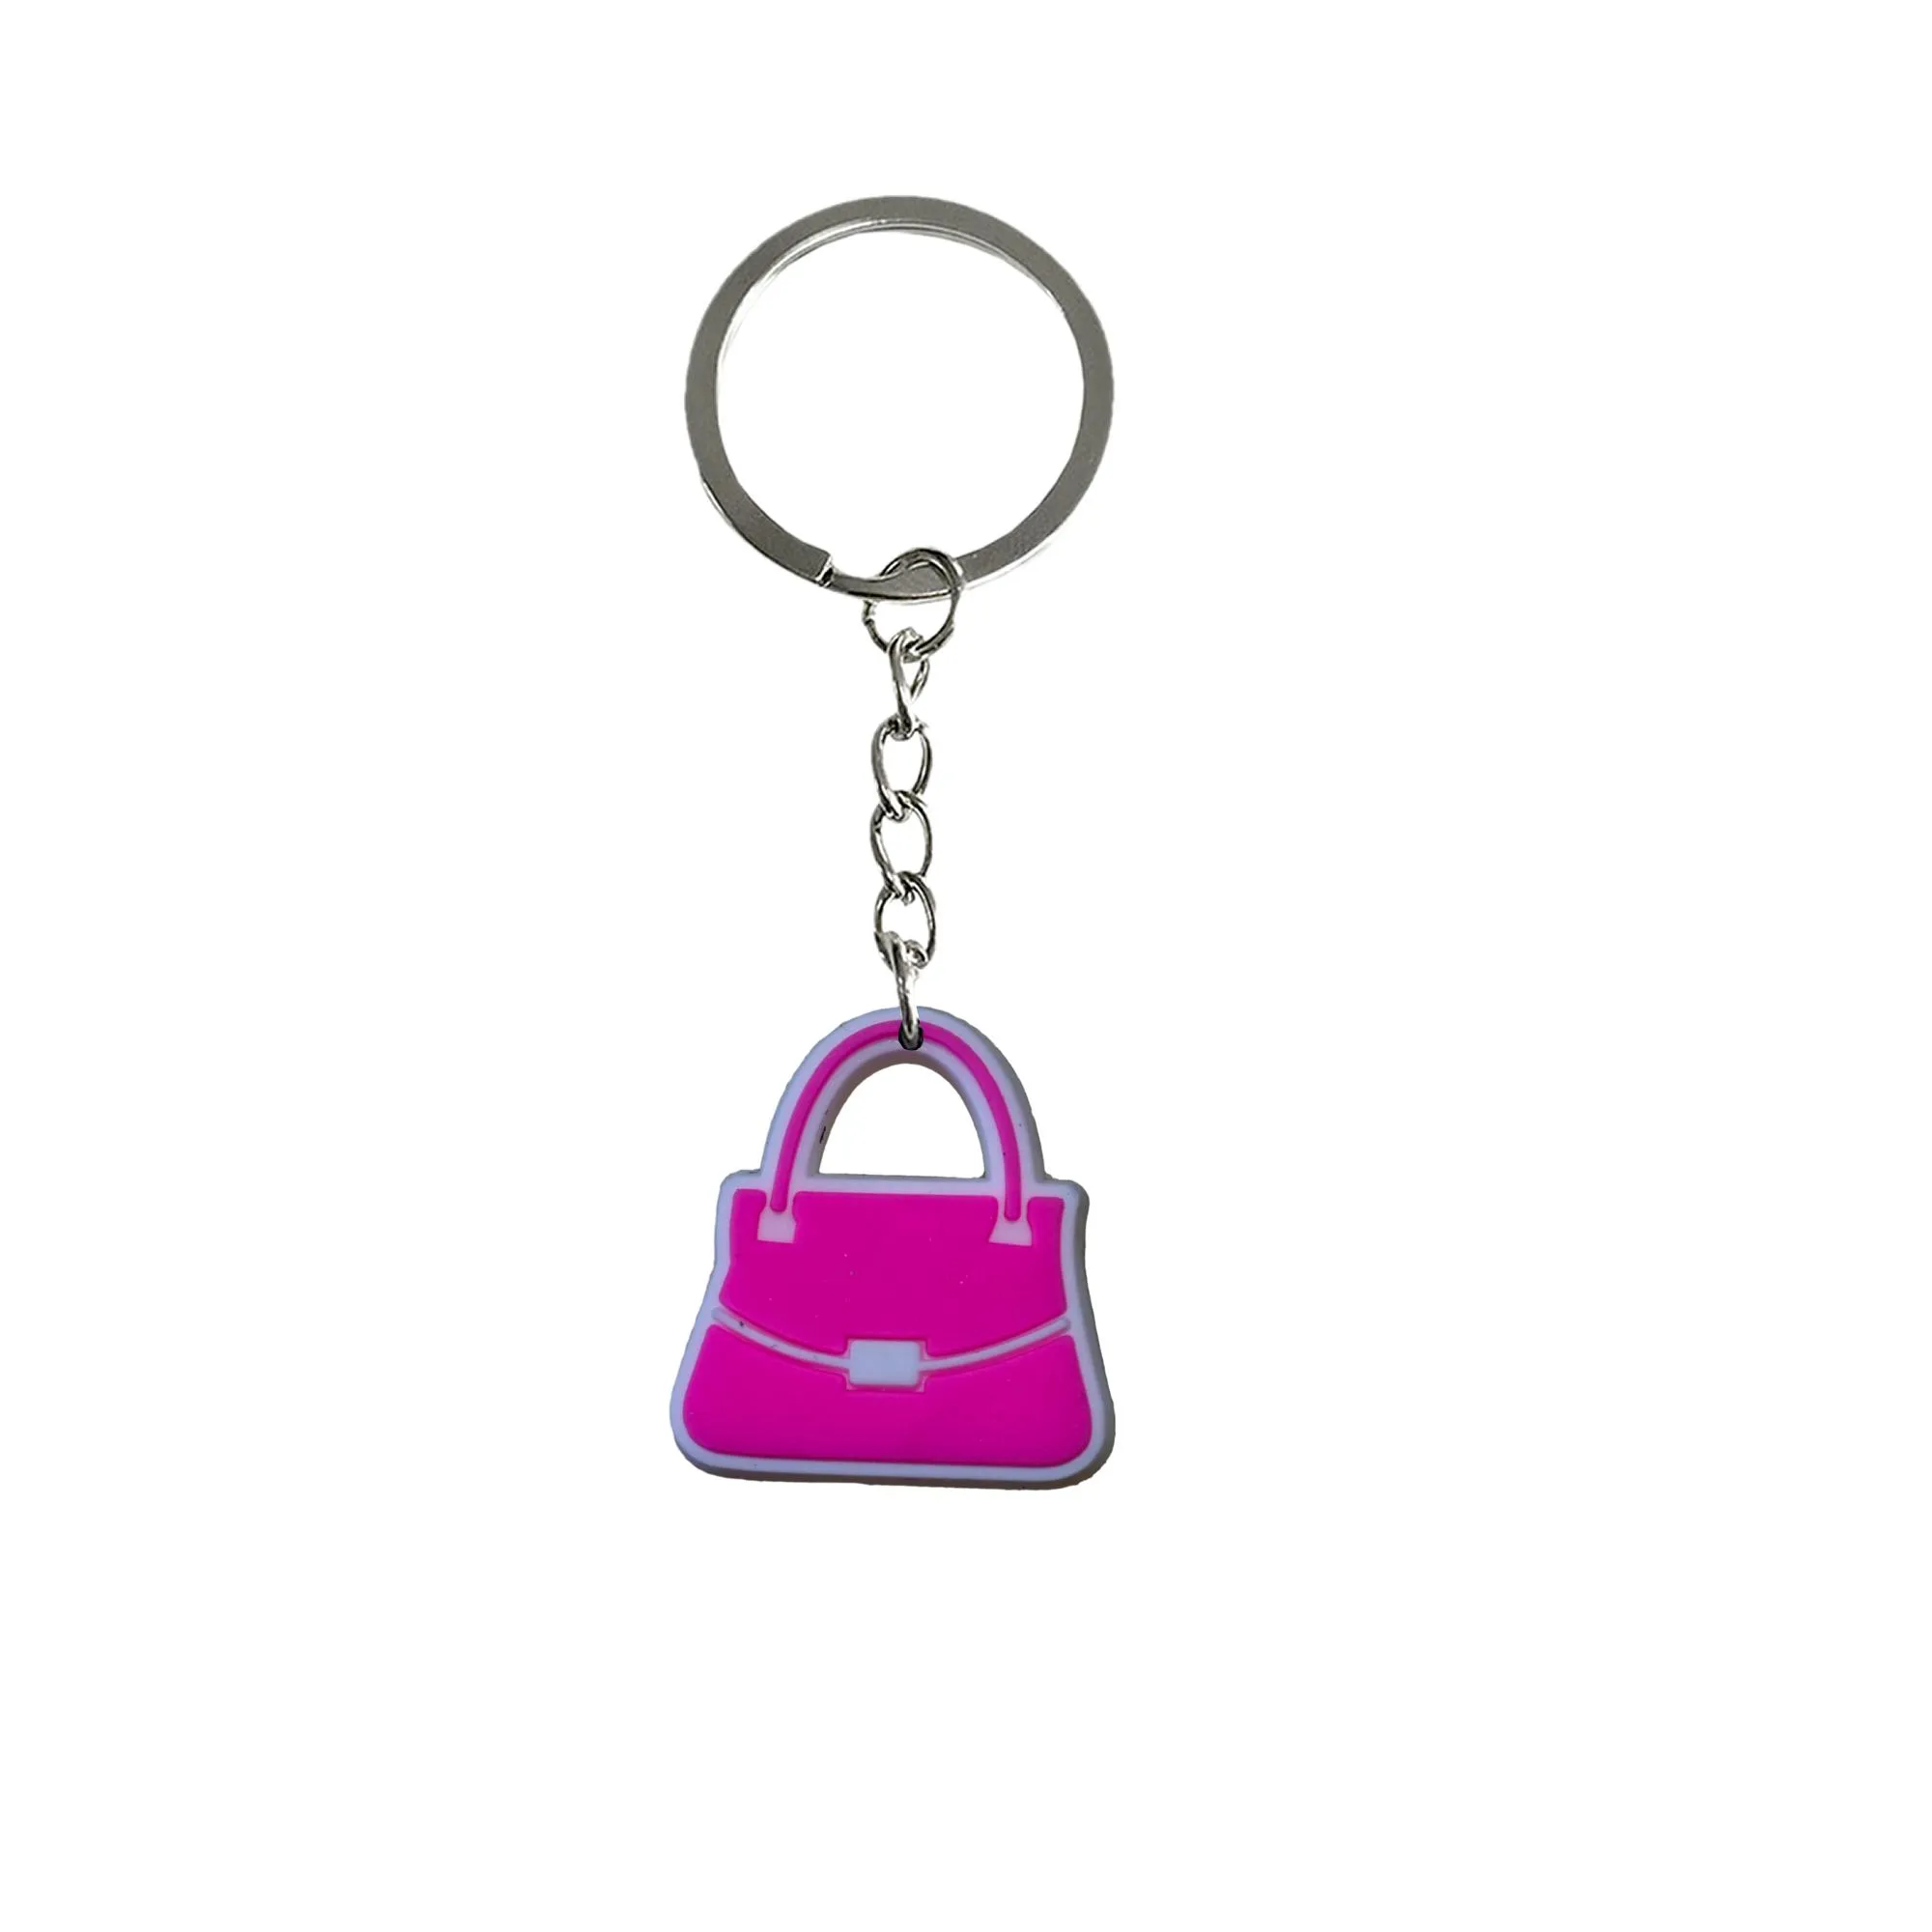 pink keychain key ring for girls goodie bag stuffers supplies anime cool keychains backpacks keyring suitable schoolbag school day birthday party gift backpack shoulder pendant accessories charm chain christmas fans